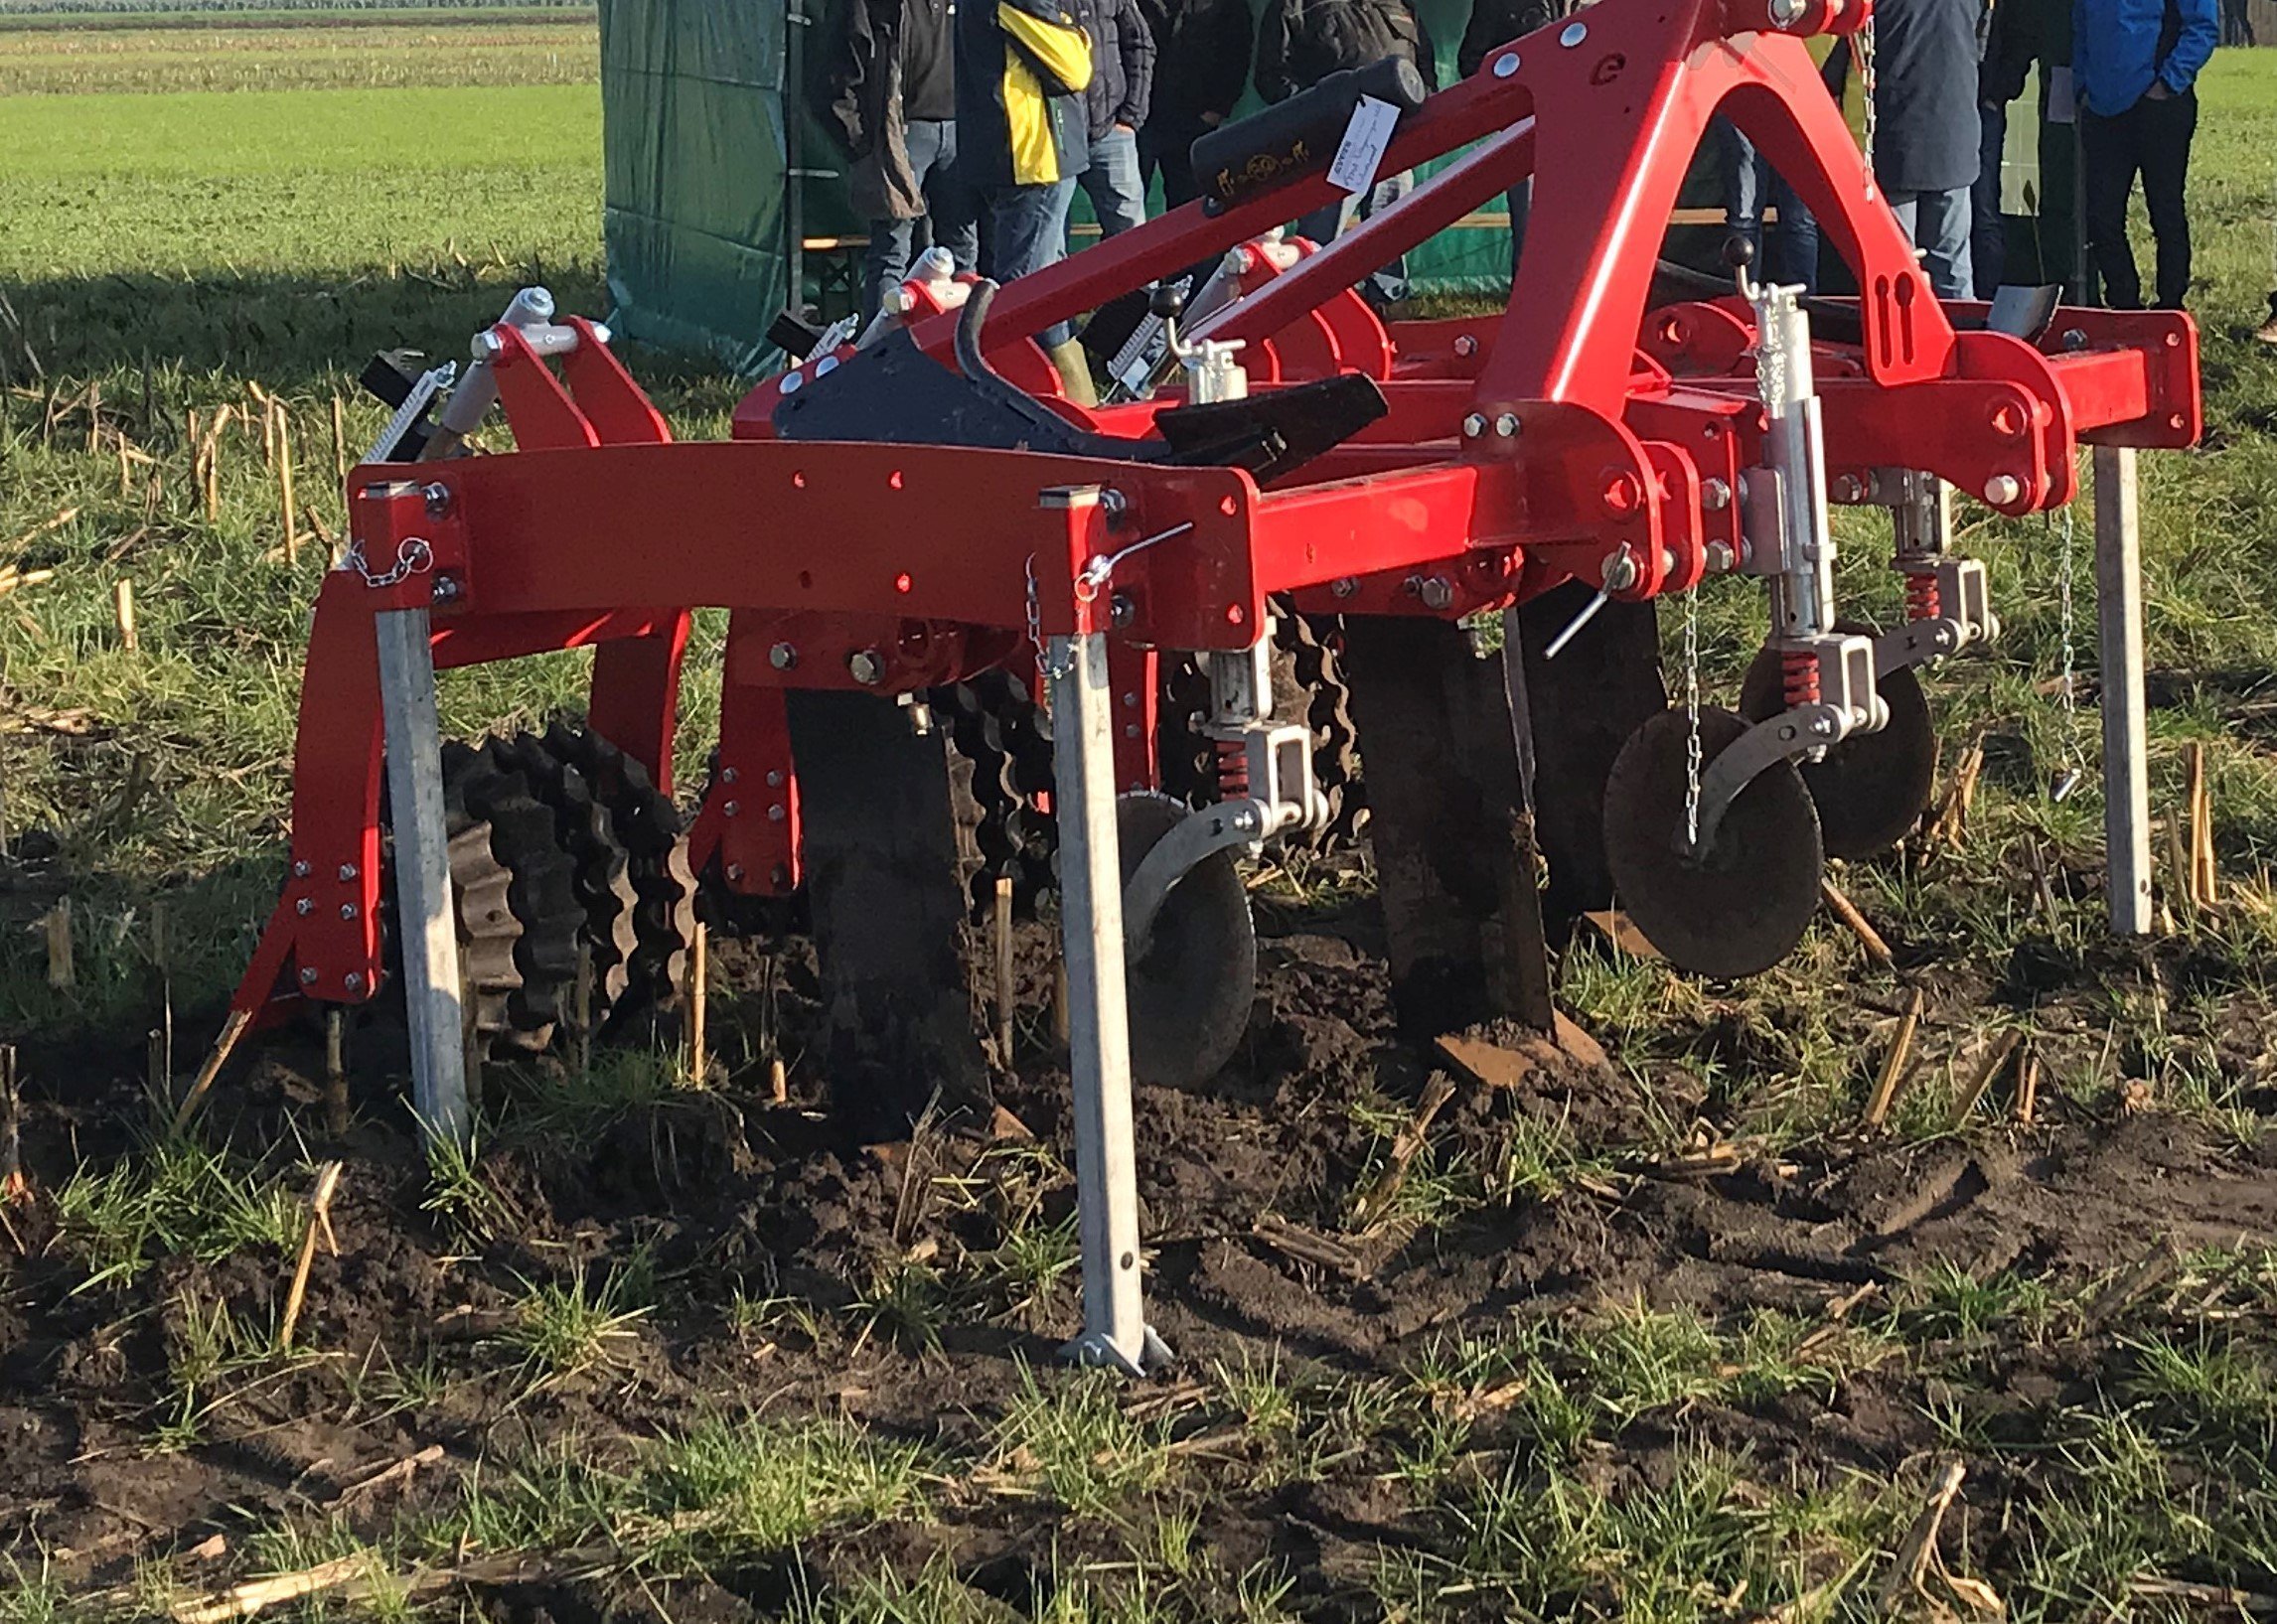 Grassland subsoiler with a variable tine distance of 75-90 cm. Very suitable for cultivating the soil between the maize stubble rows. Removes structural damage without damaging the catch crop